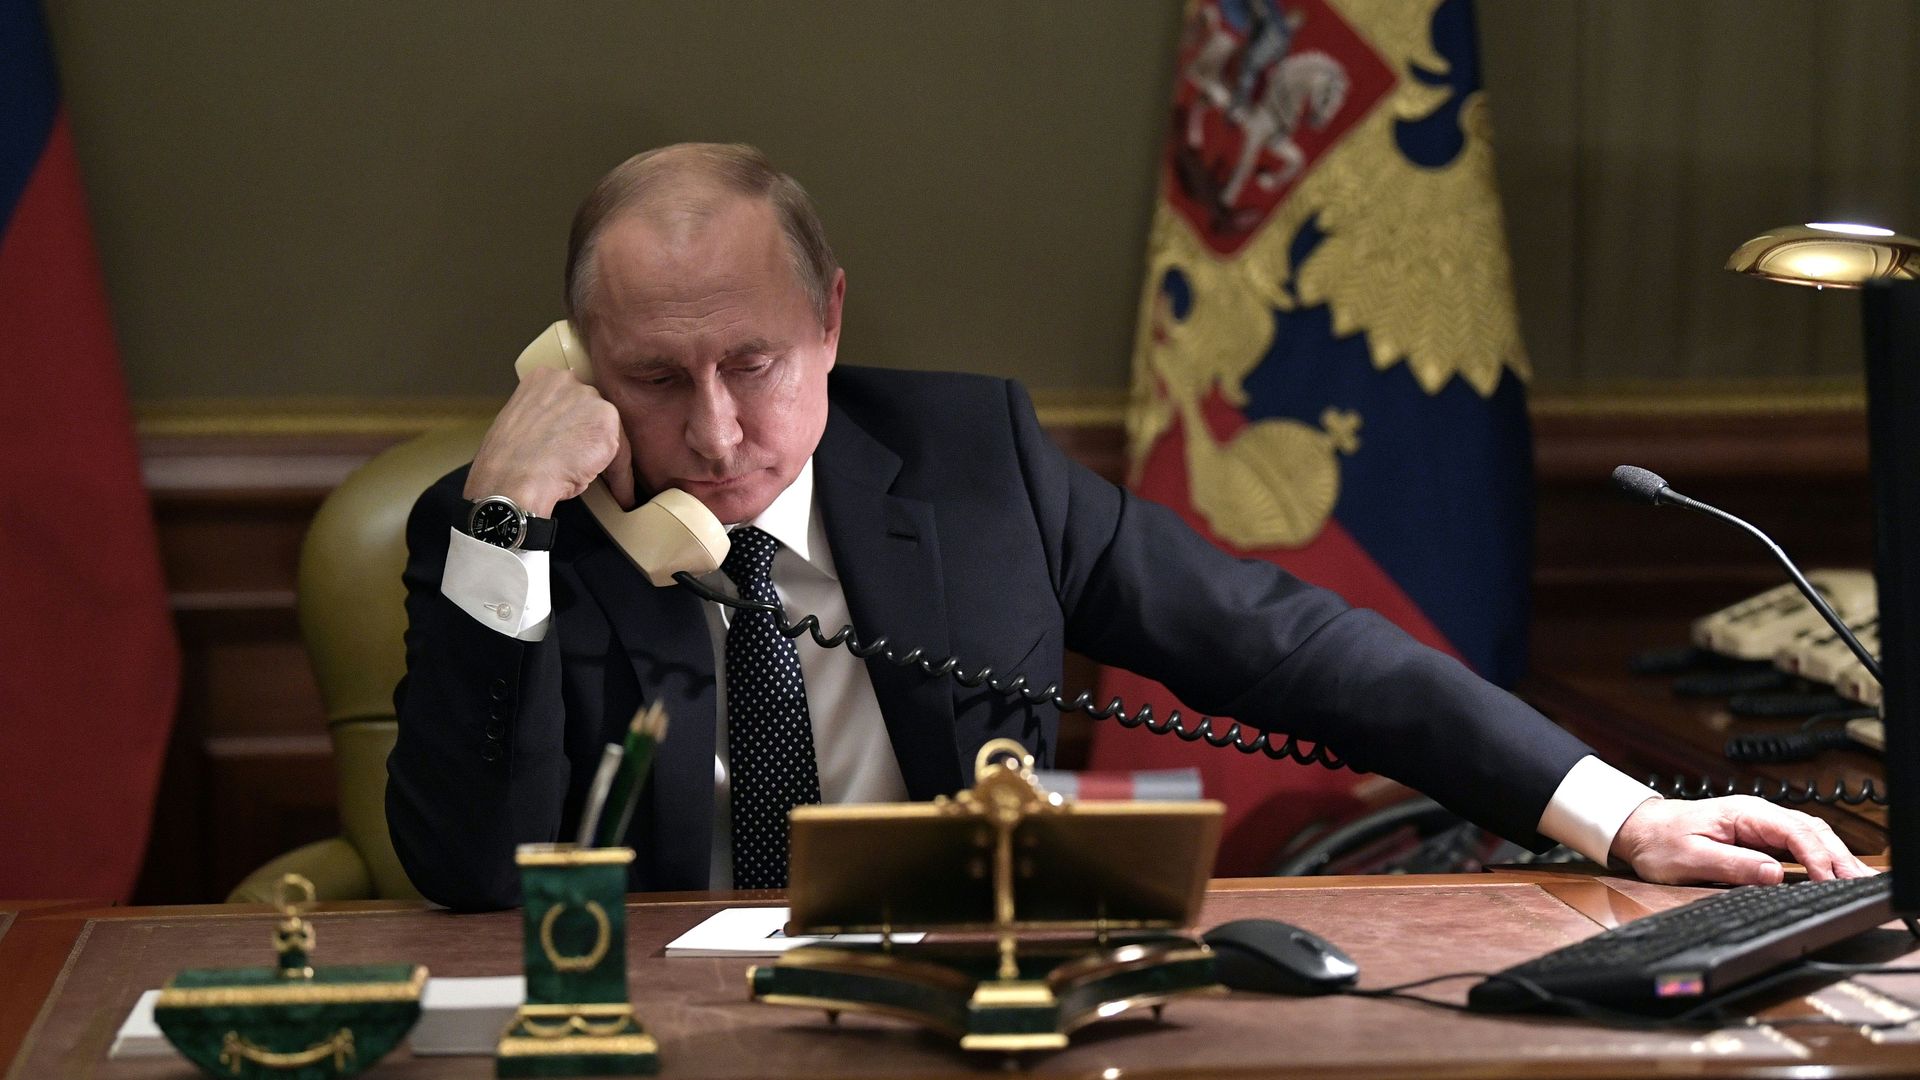 Photo of Vladimir Putin sitting at his desk holding a phone to his ear